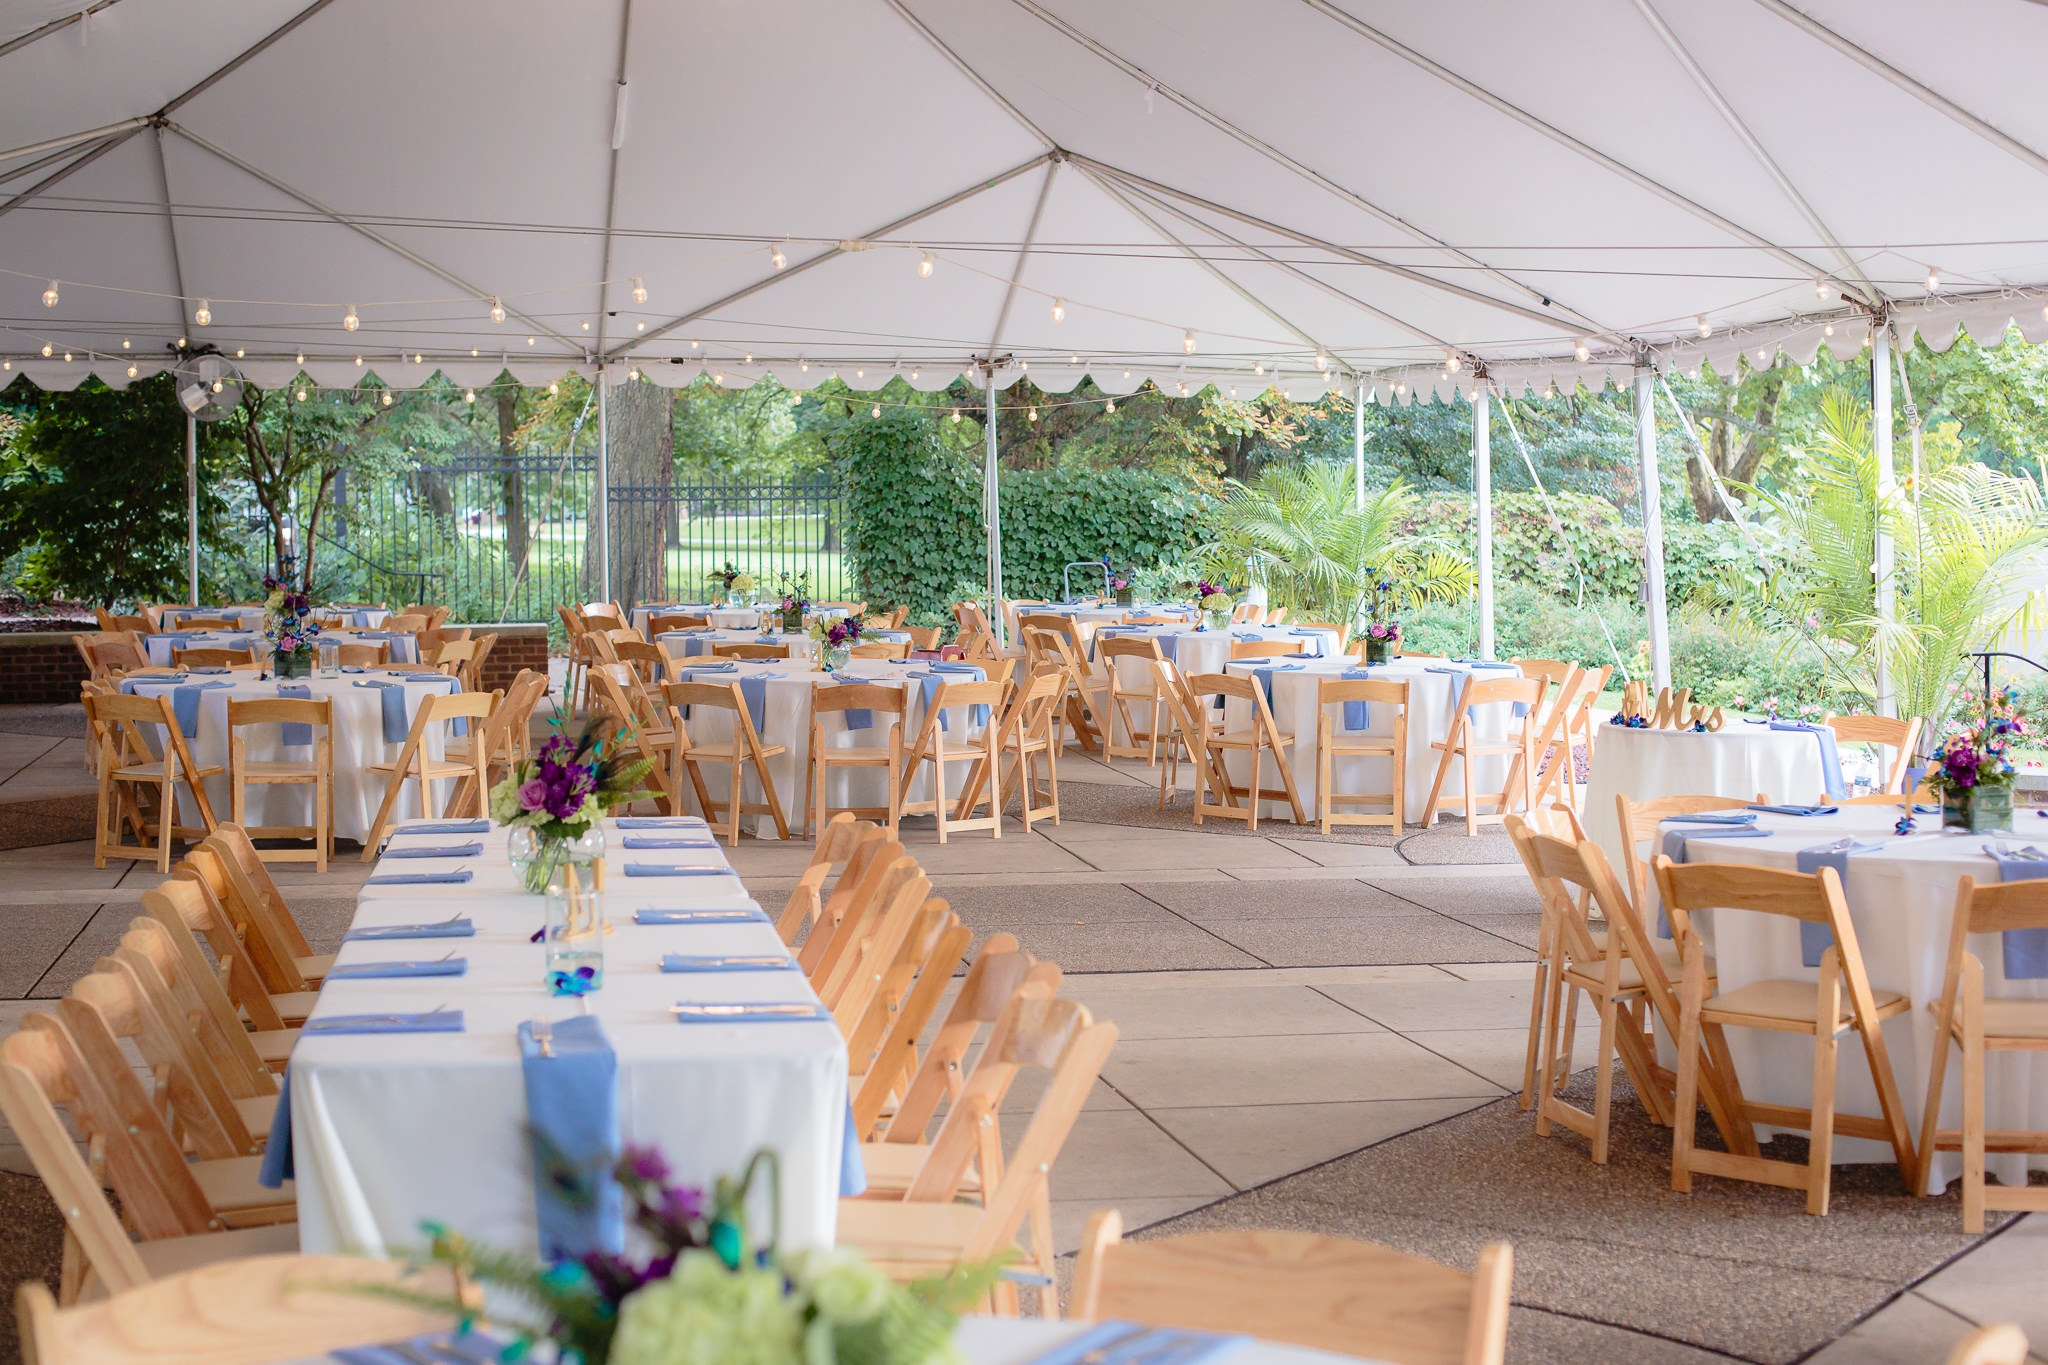 Tented wedding reception at the National Aviary in Pittsburgh, PA